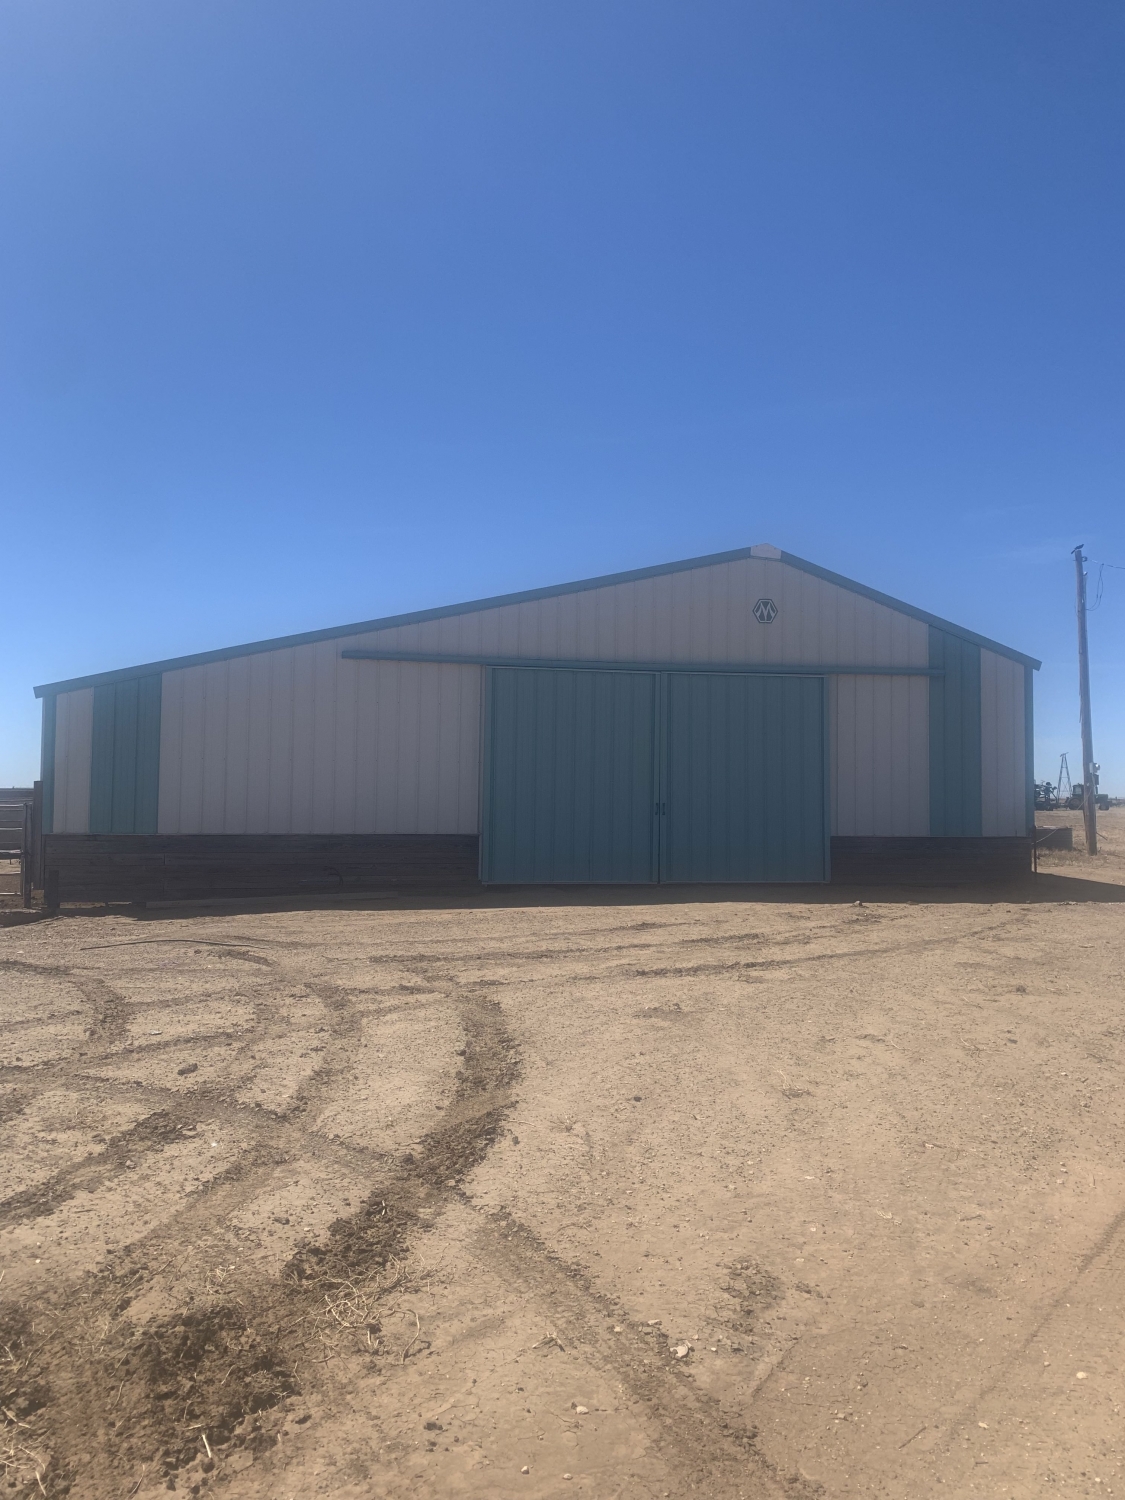 white metal barn with baby blue doors in a dirt field